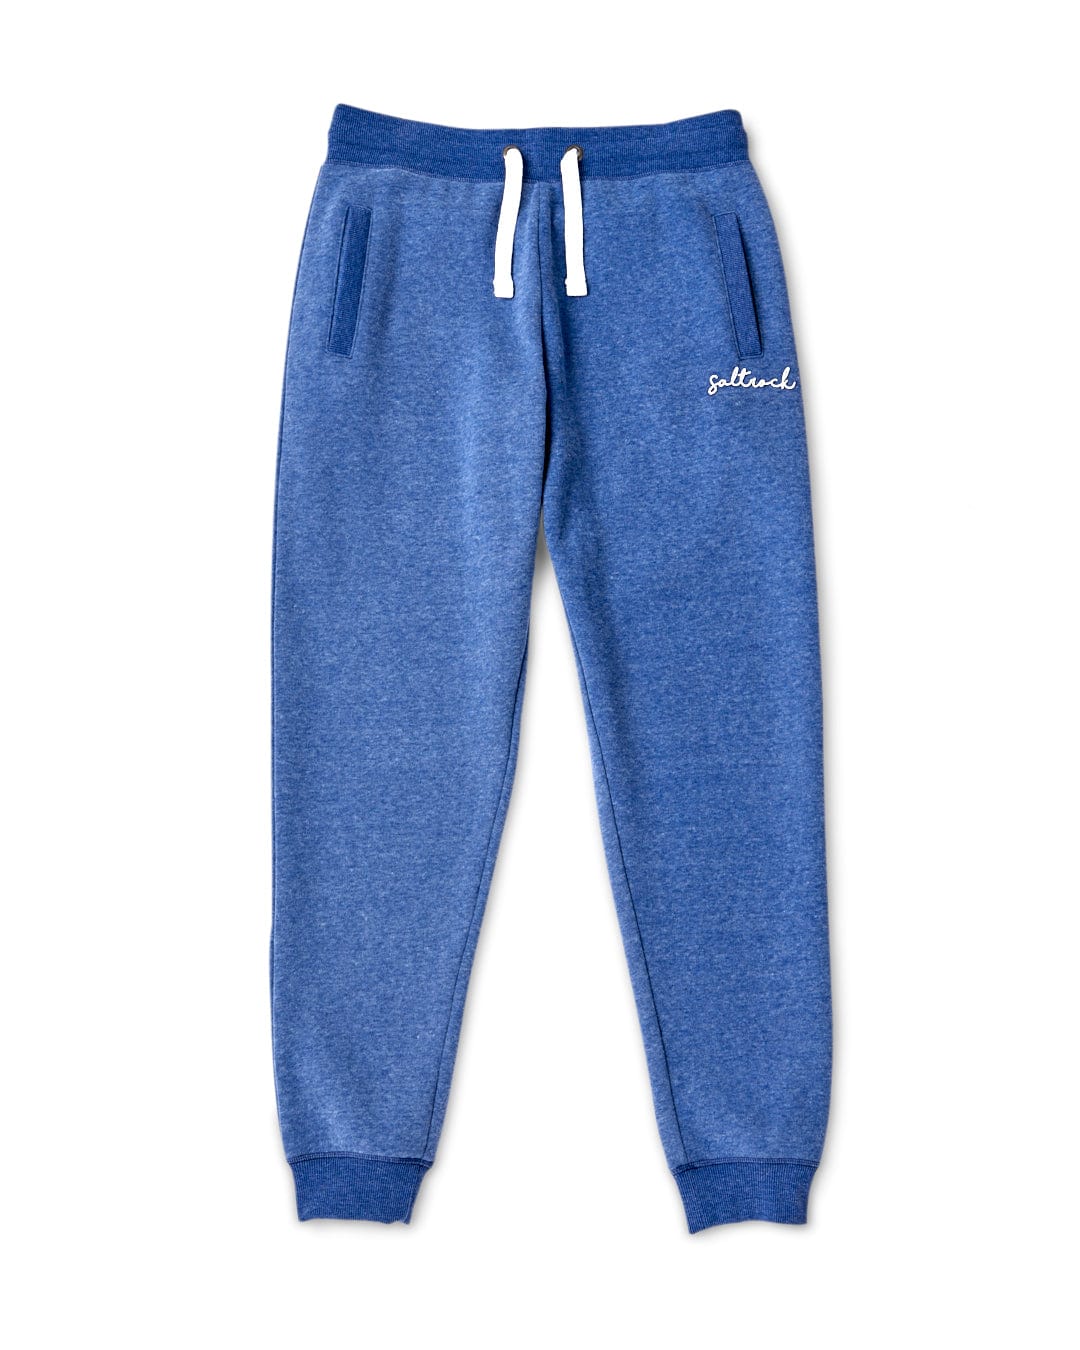 A blue Velator - Womens Jogger - Navy from the Saltrock range with a white logo on it.